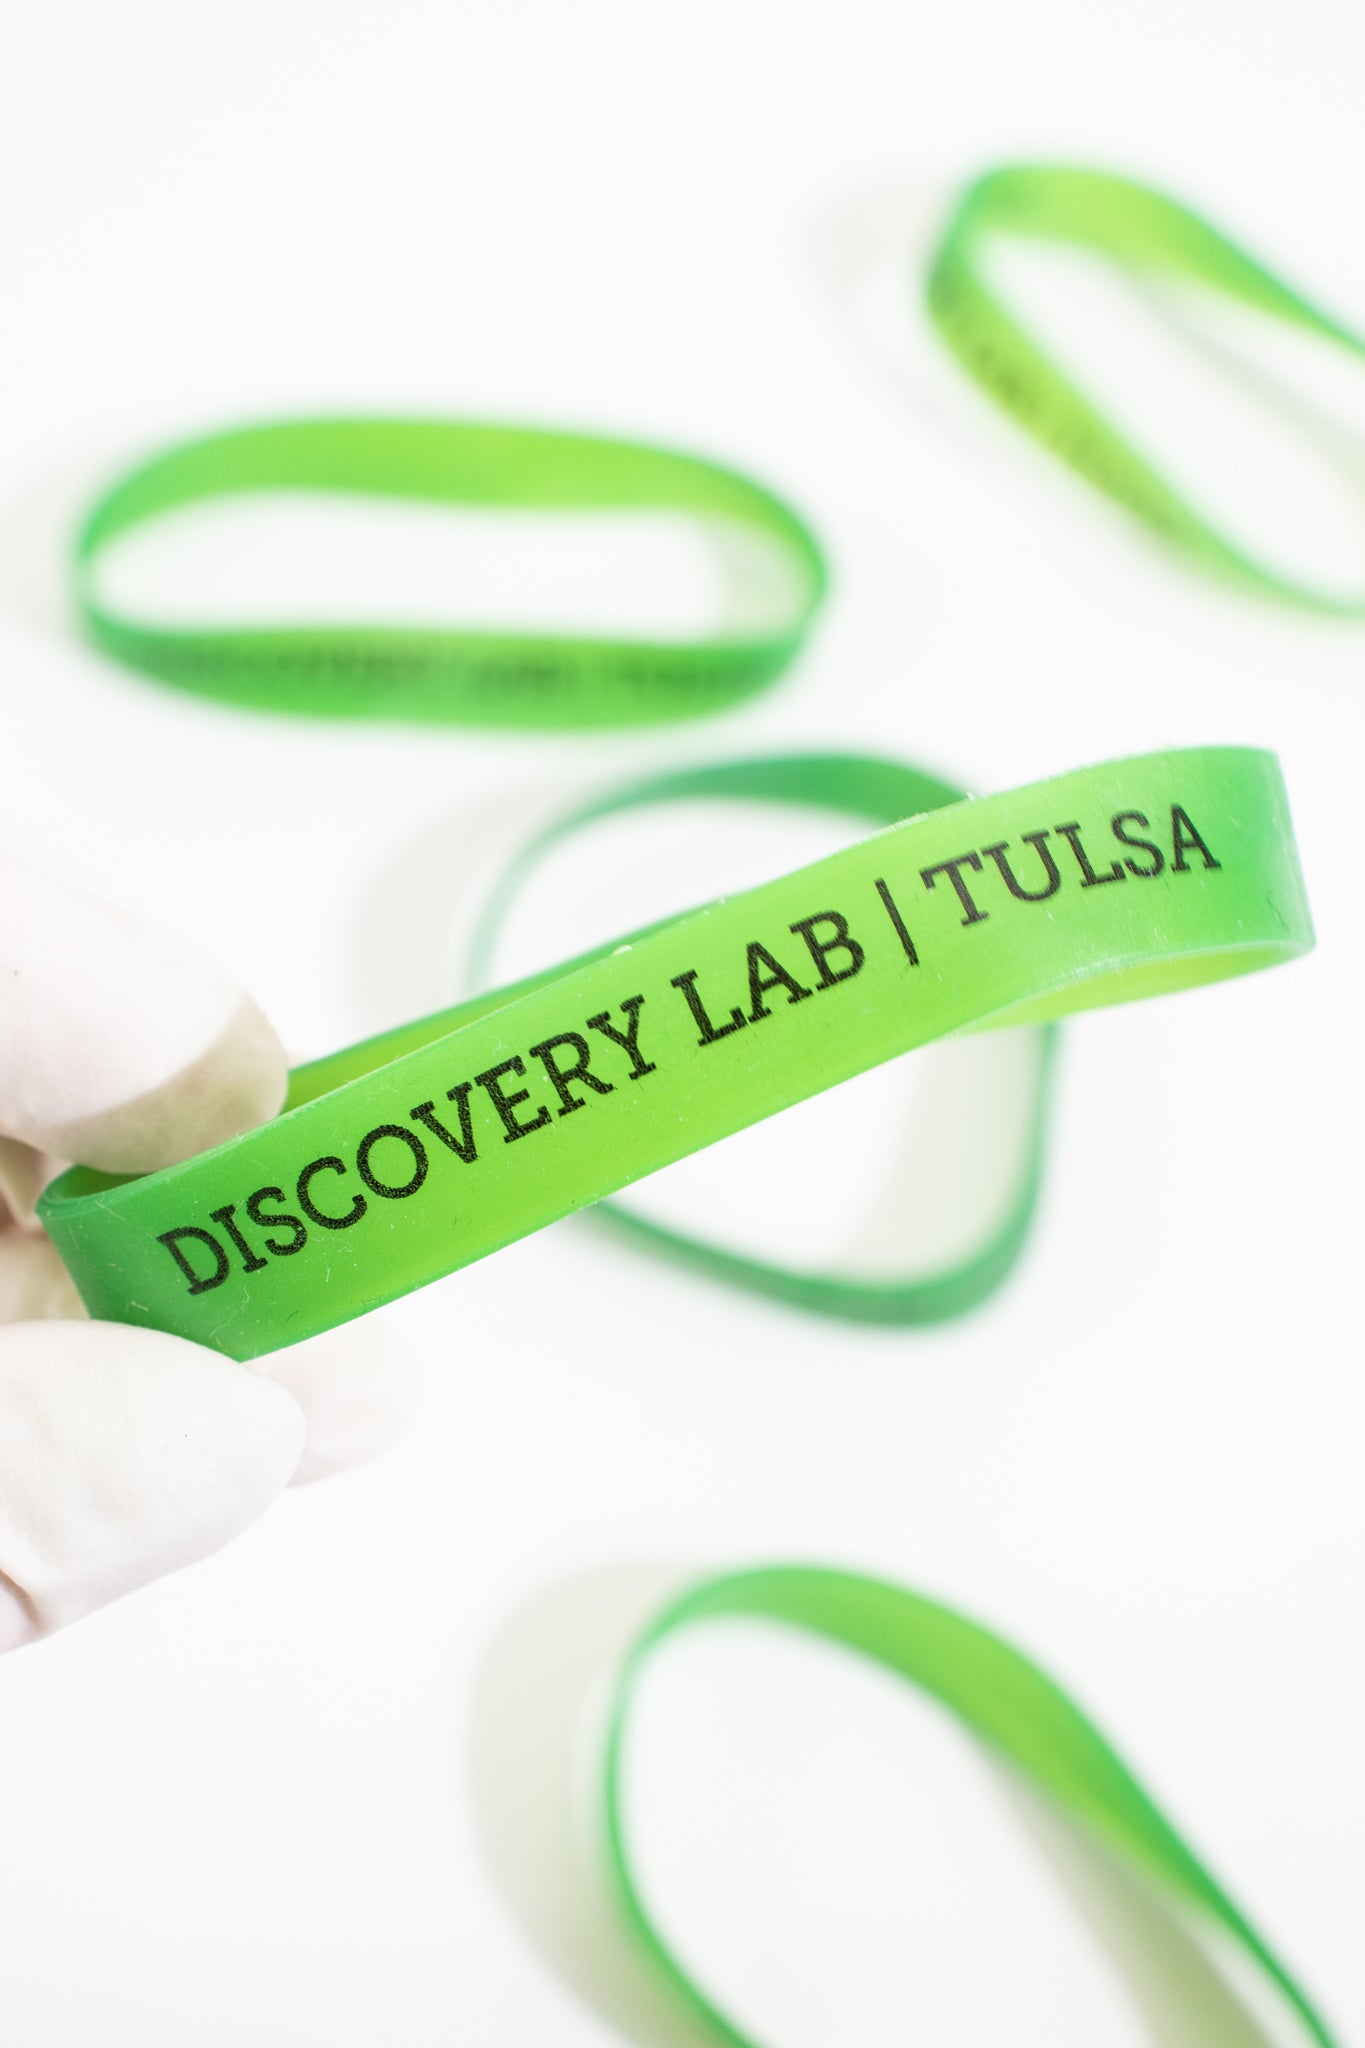 Discovery Lab Wristband - Stemcell Science Shop